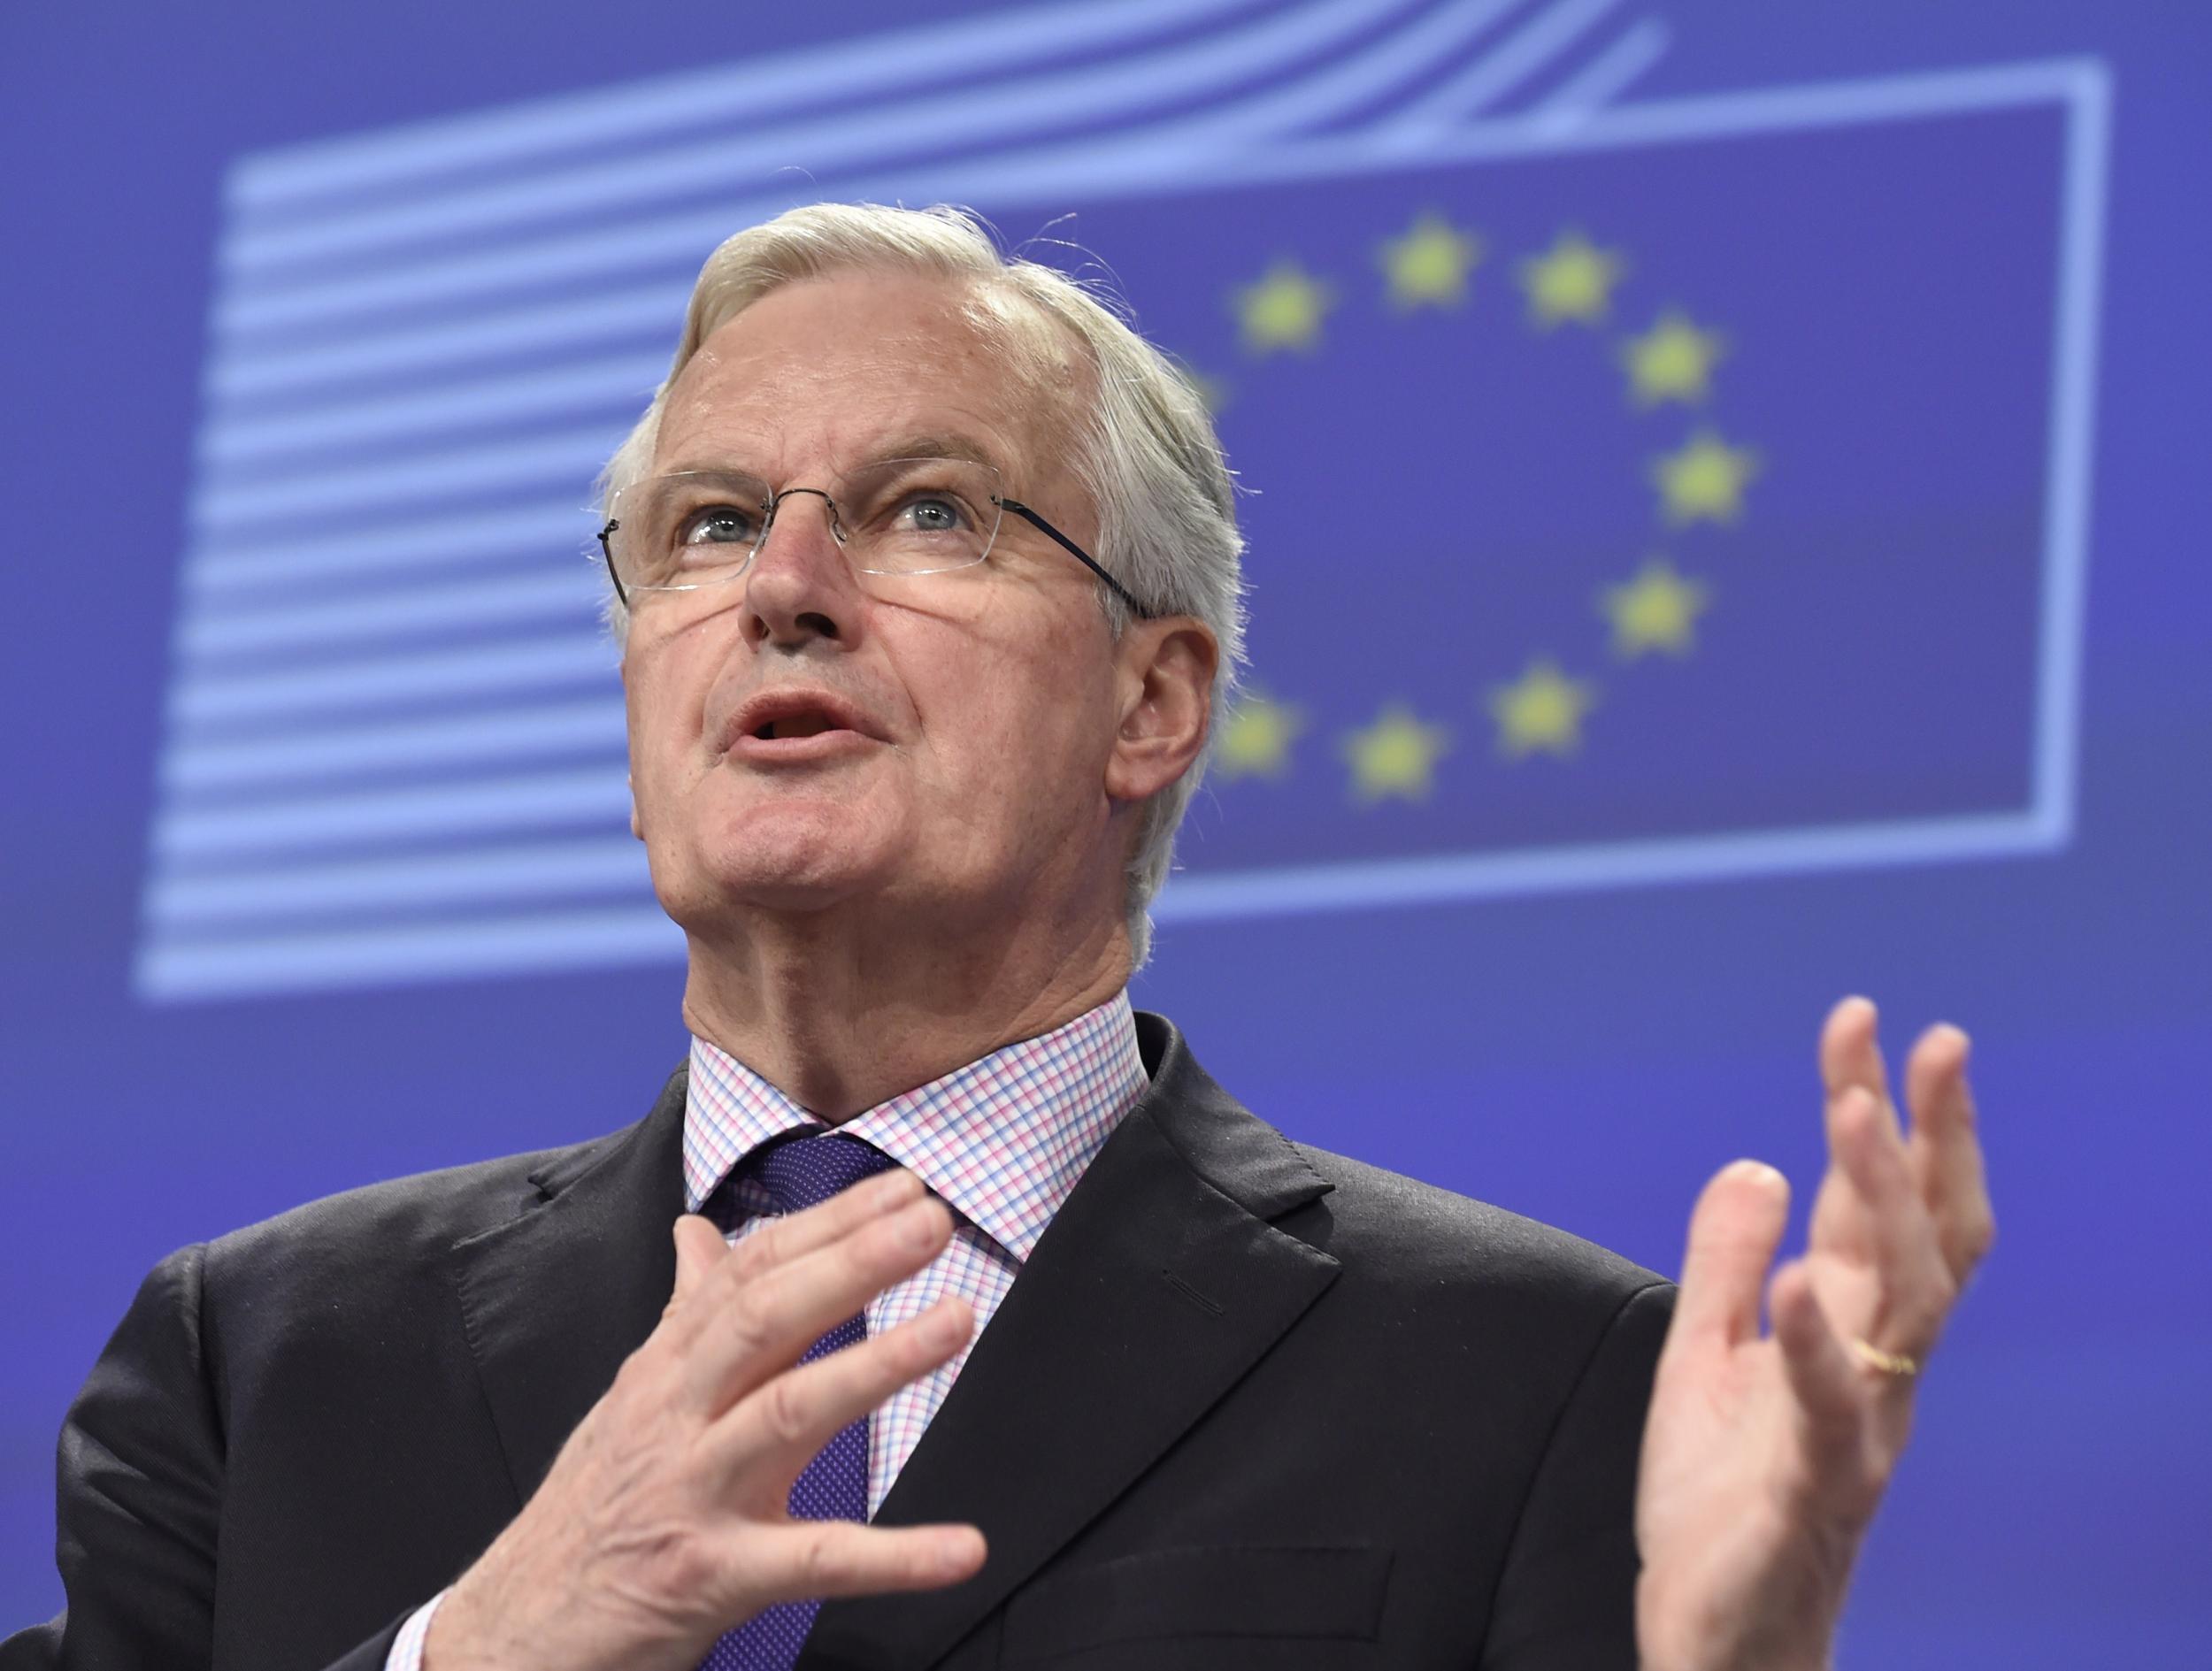 Michel Barnier will not engage with the UK until Article 50 is formally triggered